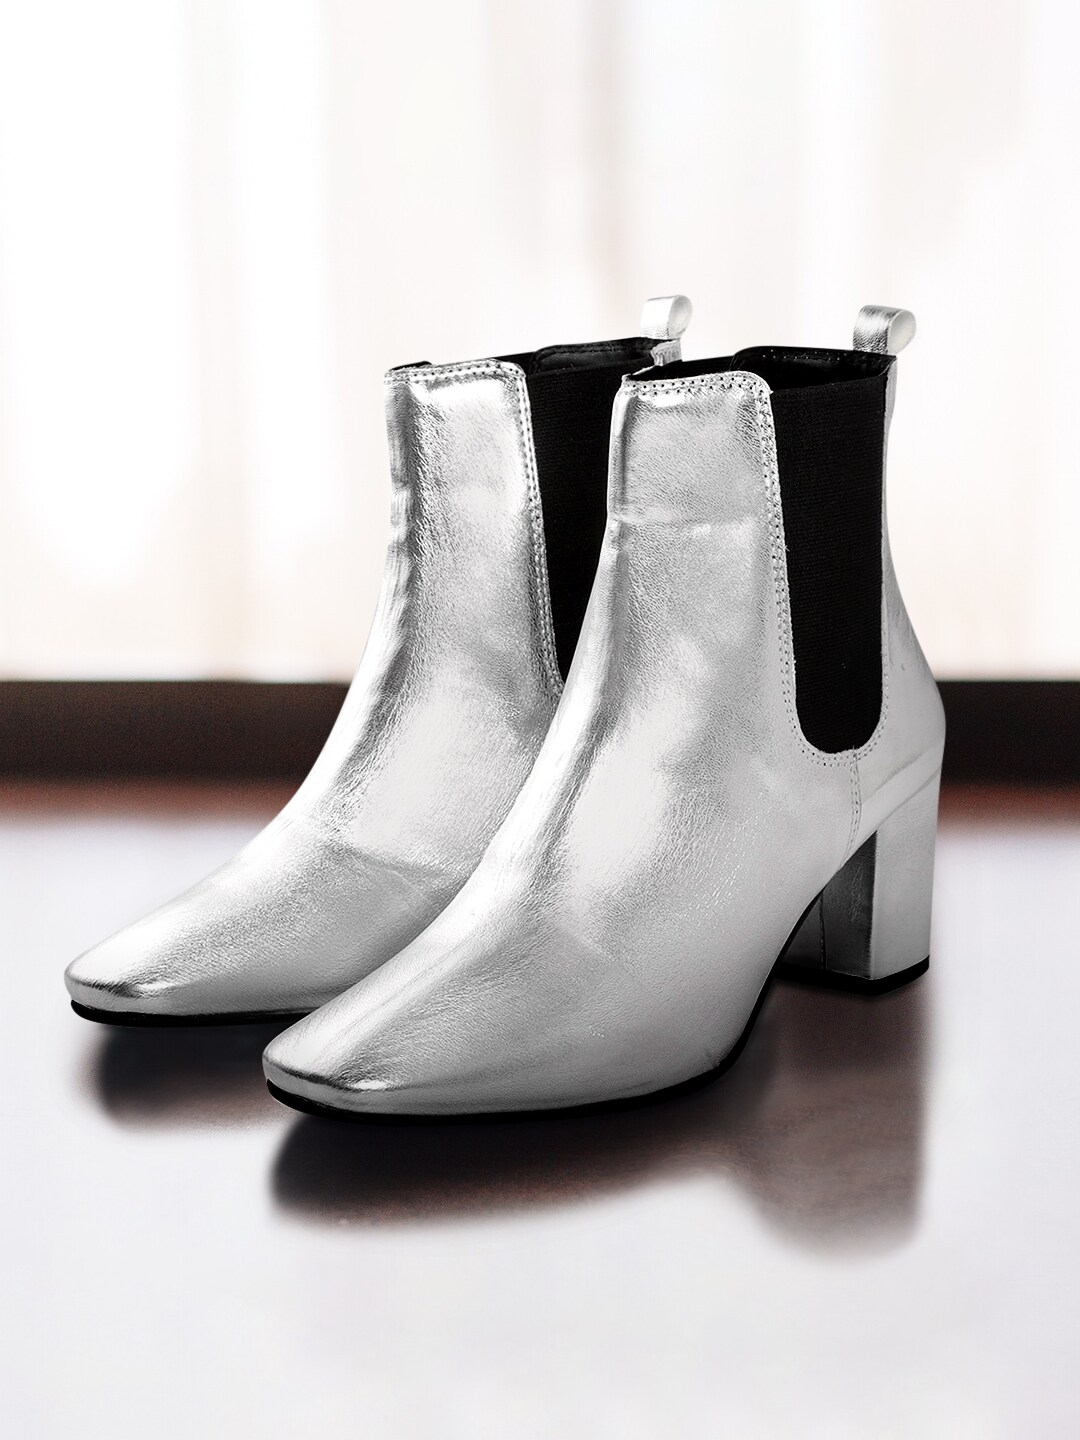 CORSICA Women Silver-Toned & Black Colourblocked Mid-Top Heeled Boots Price in India